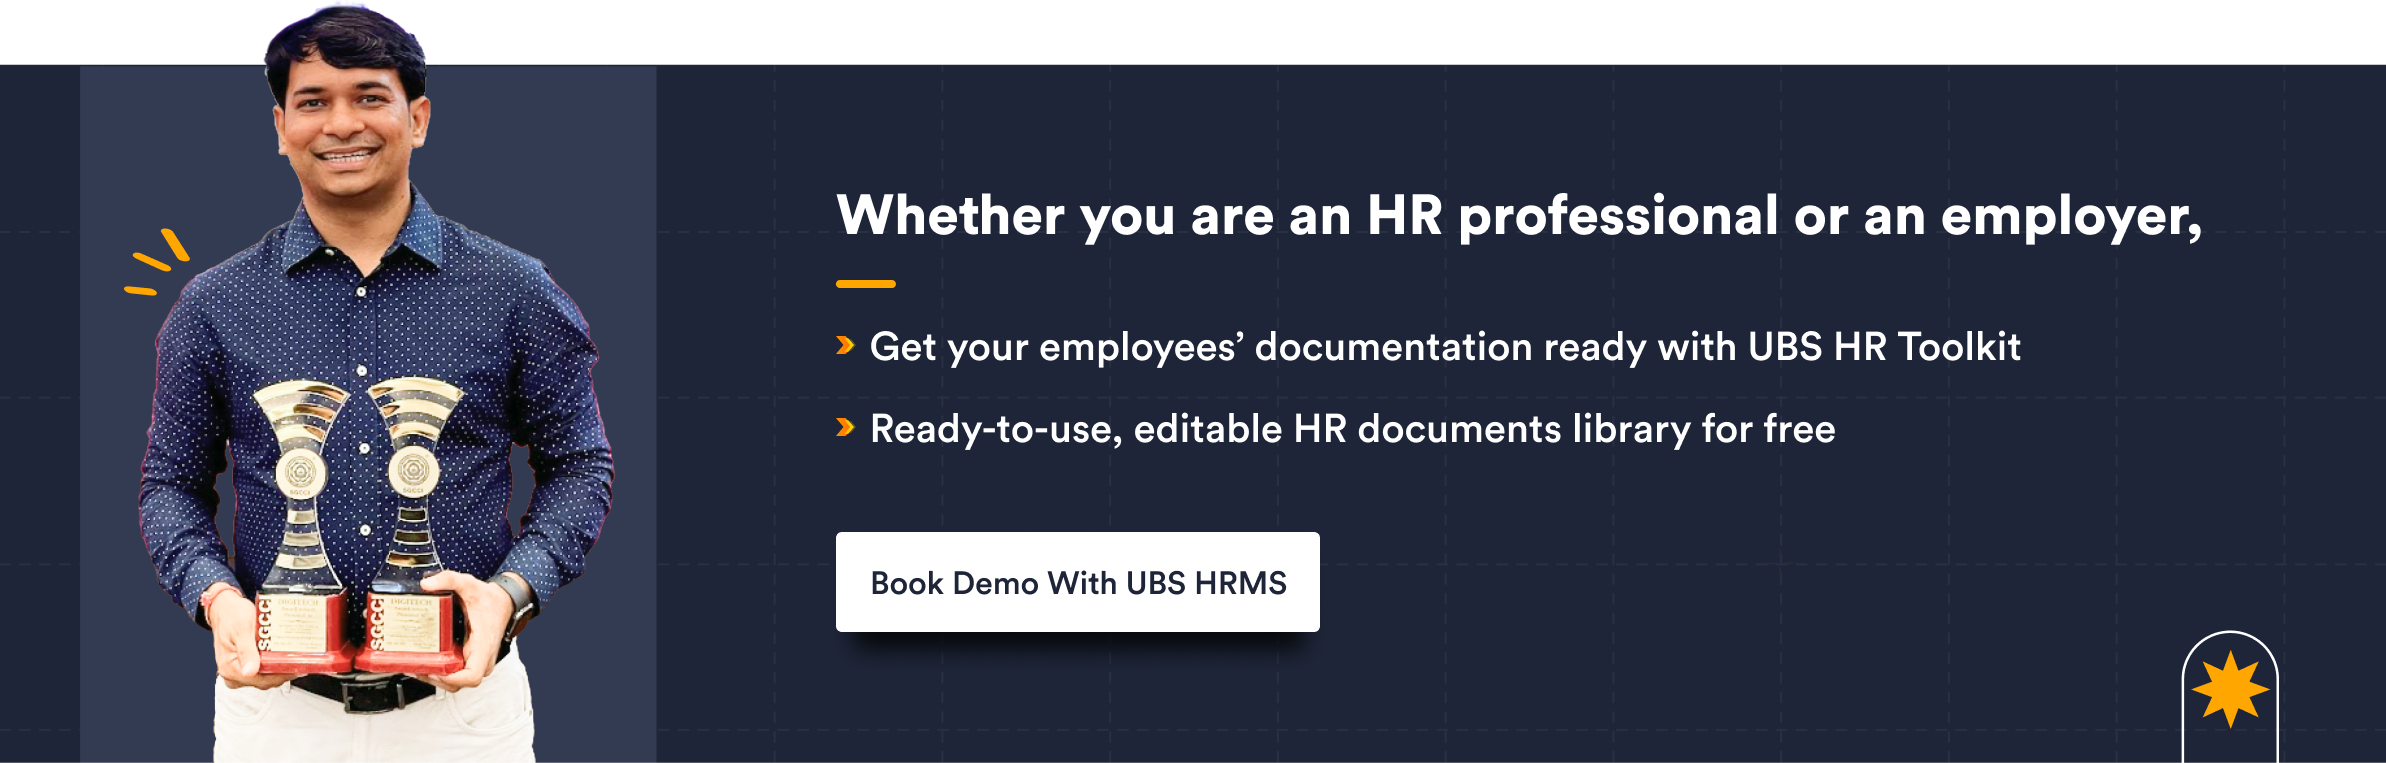 Whether you are an HR professional or an employer